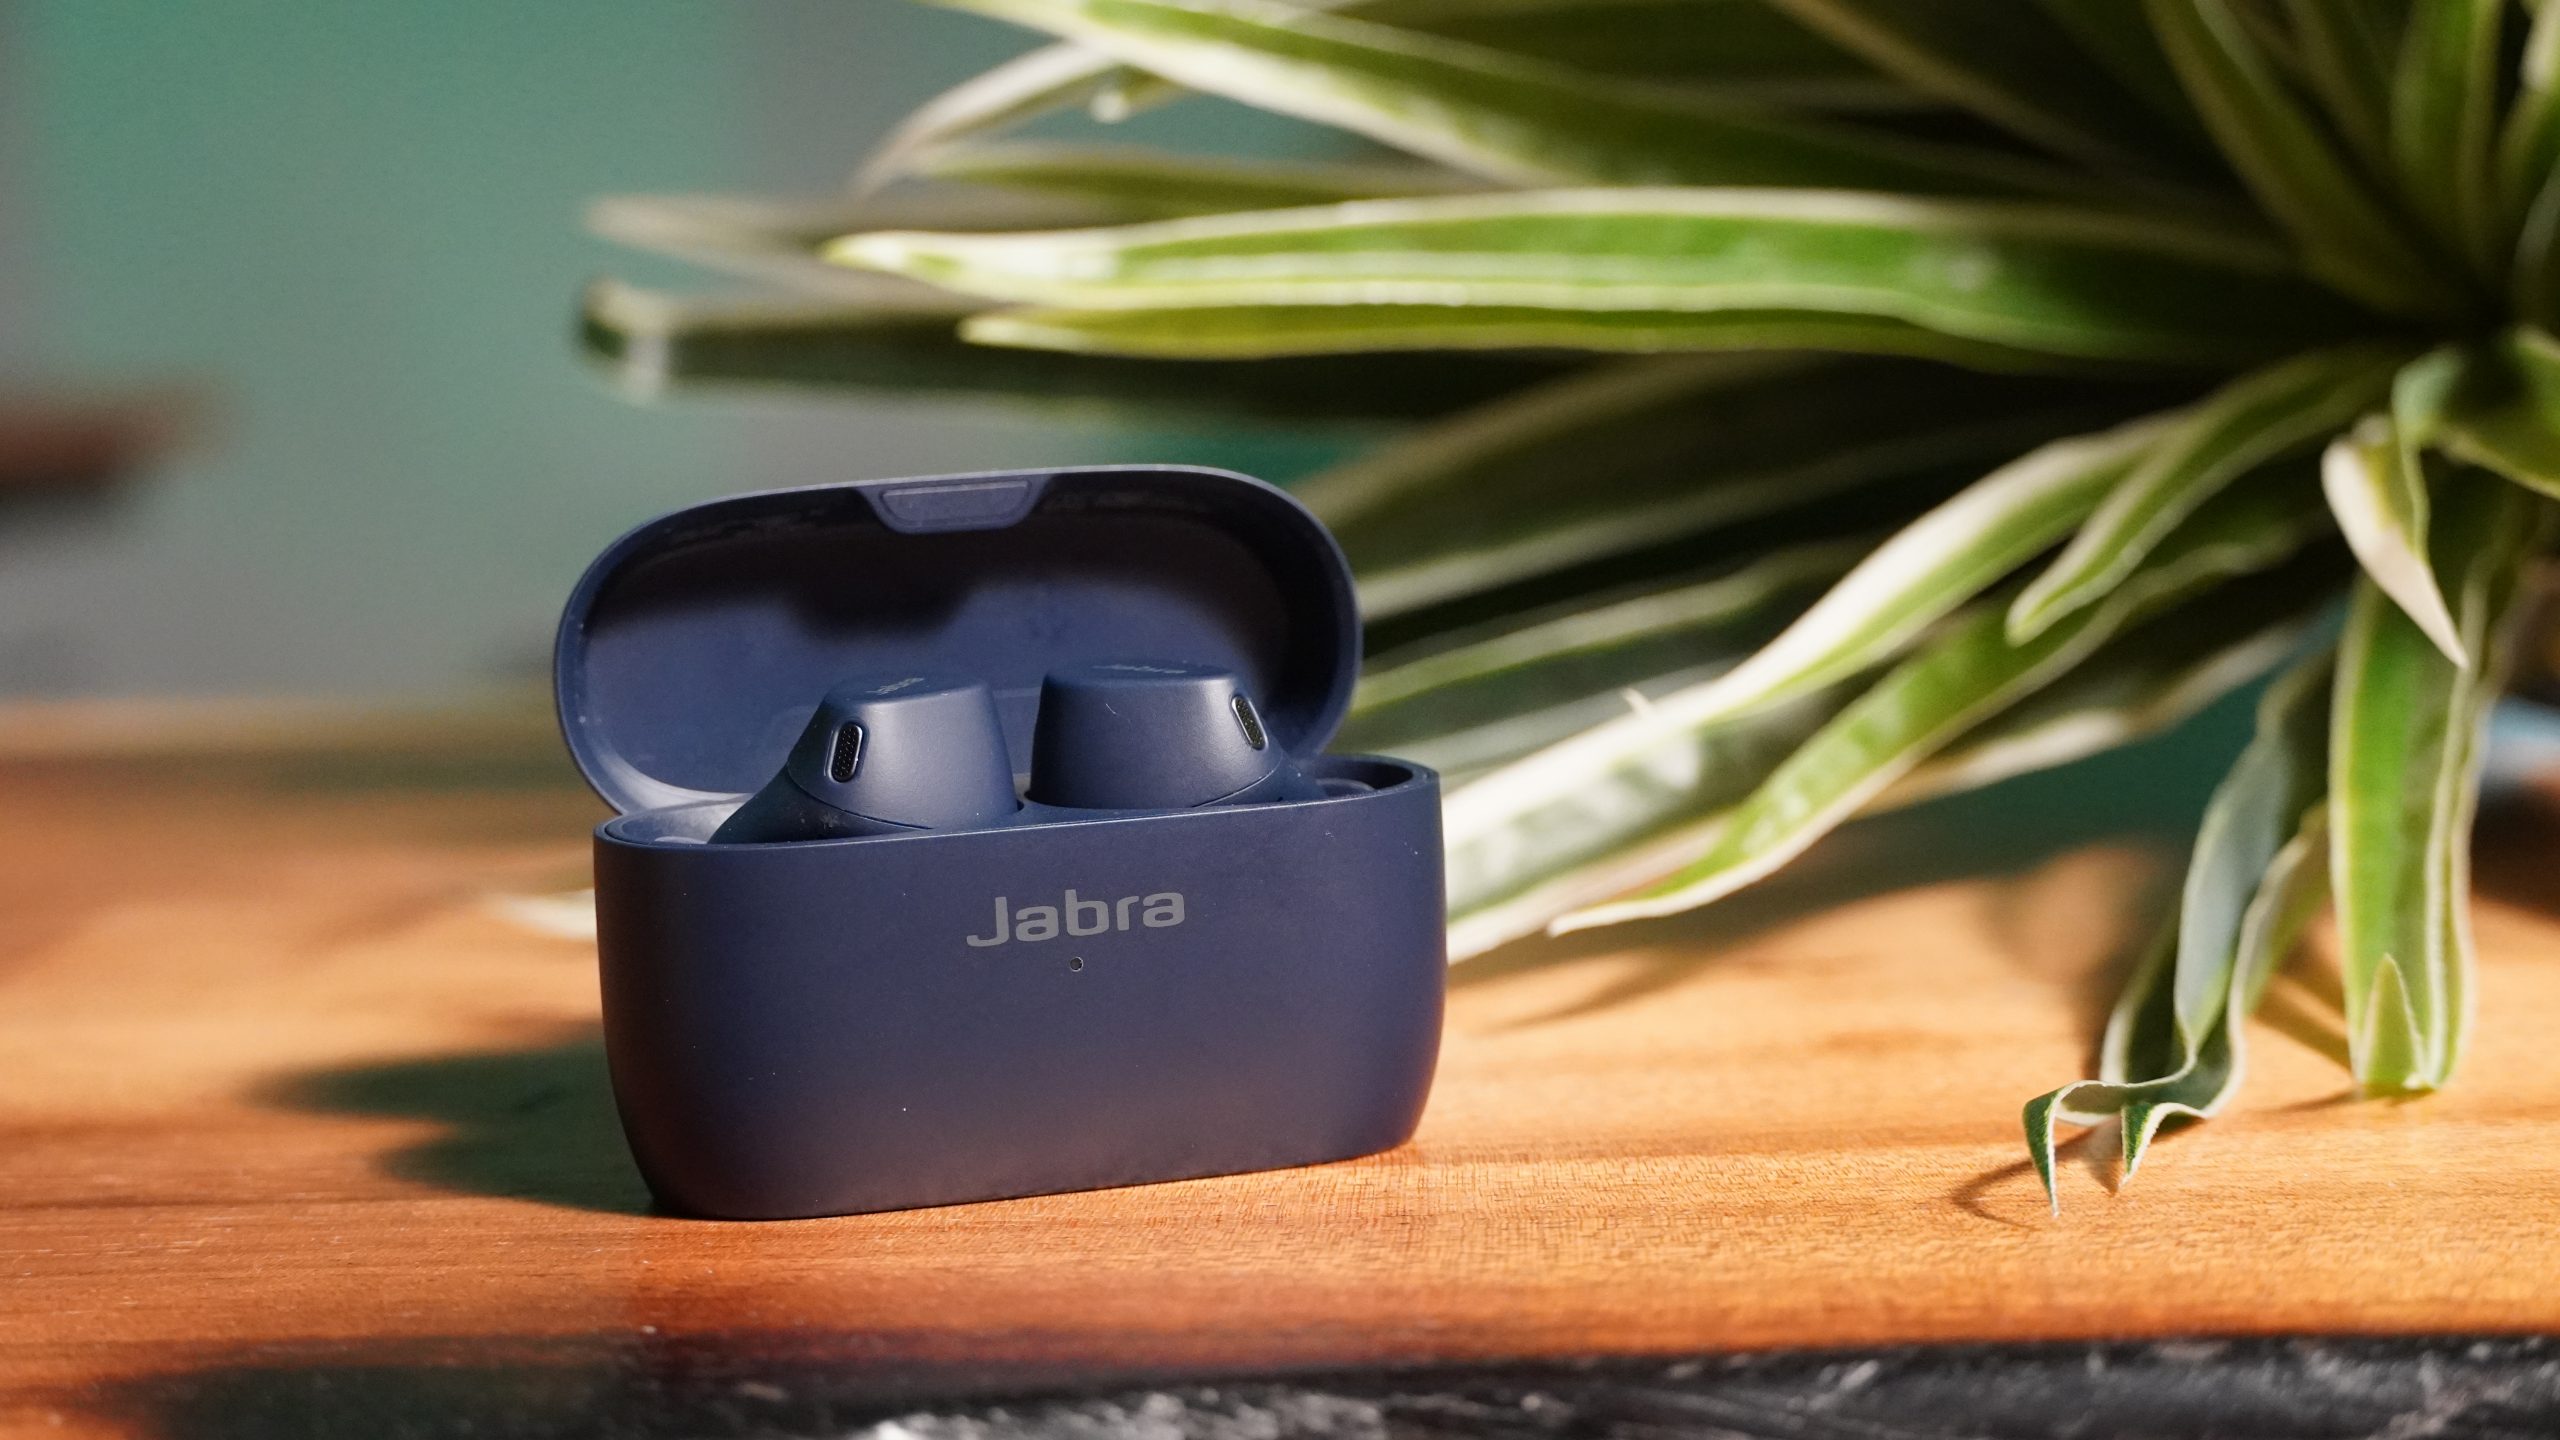 Jabra Elite 4 Active earbuds in case on a table next to a plant.